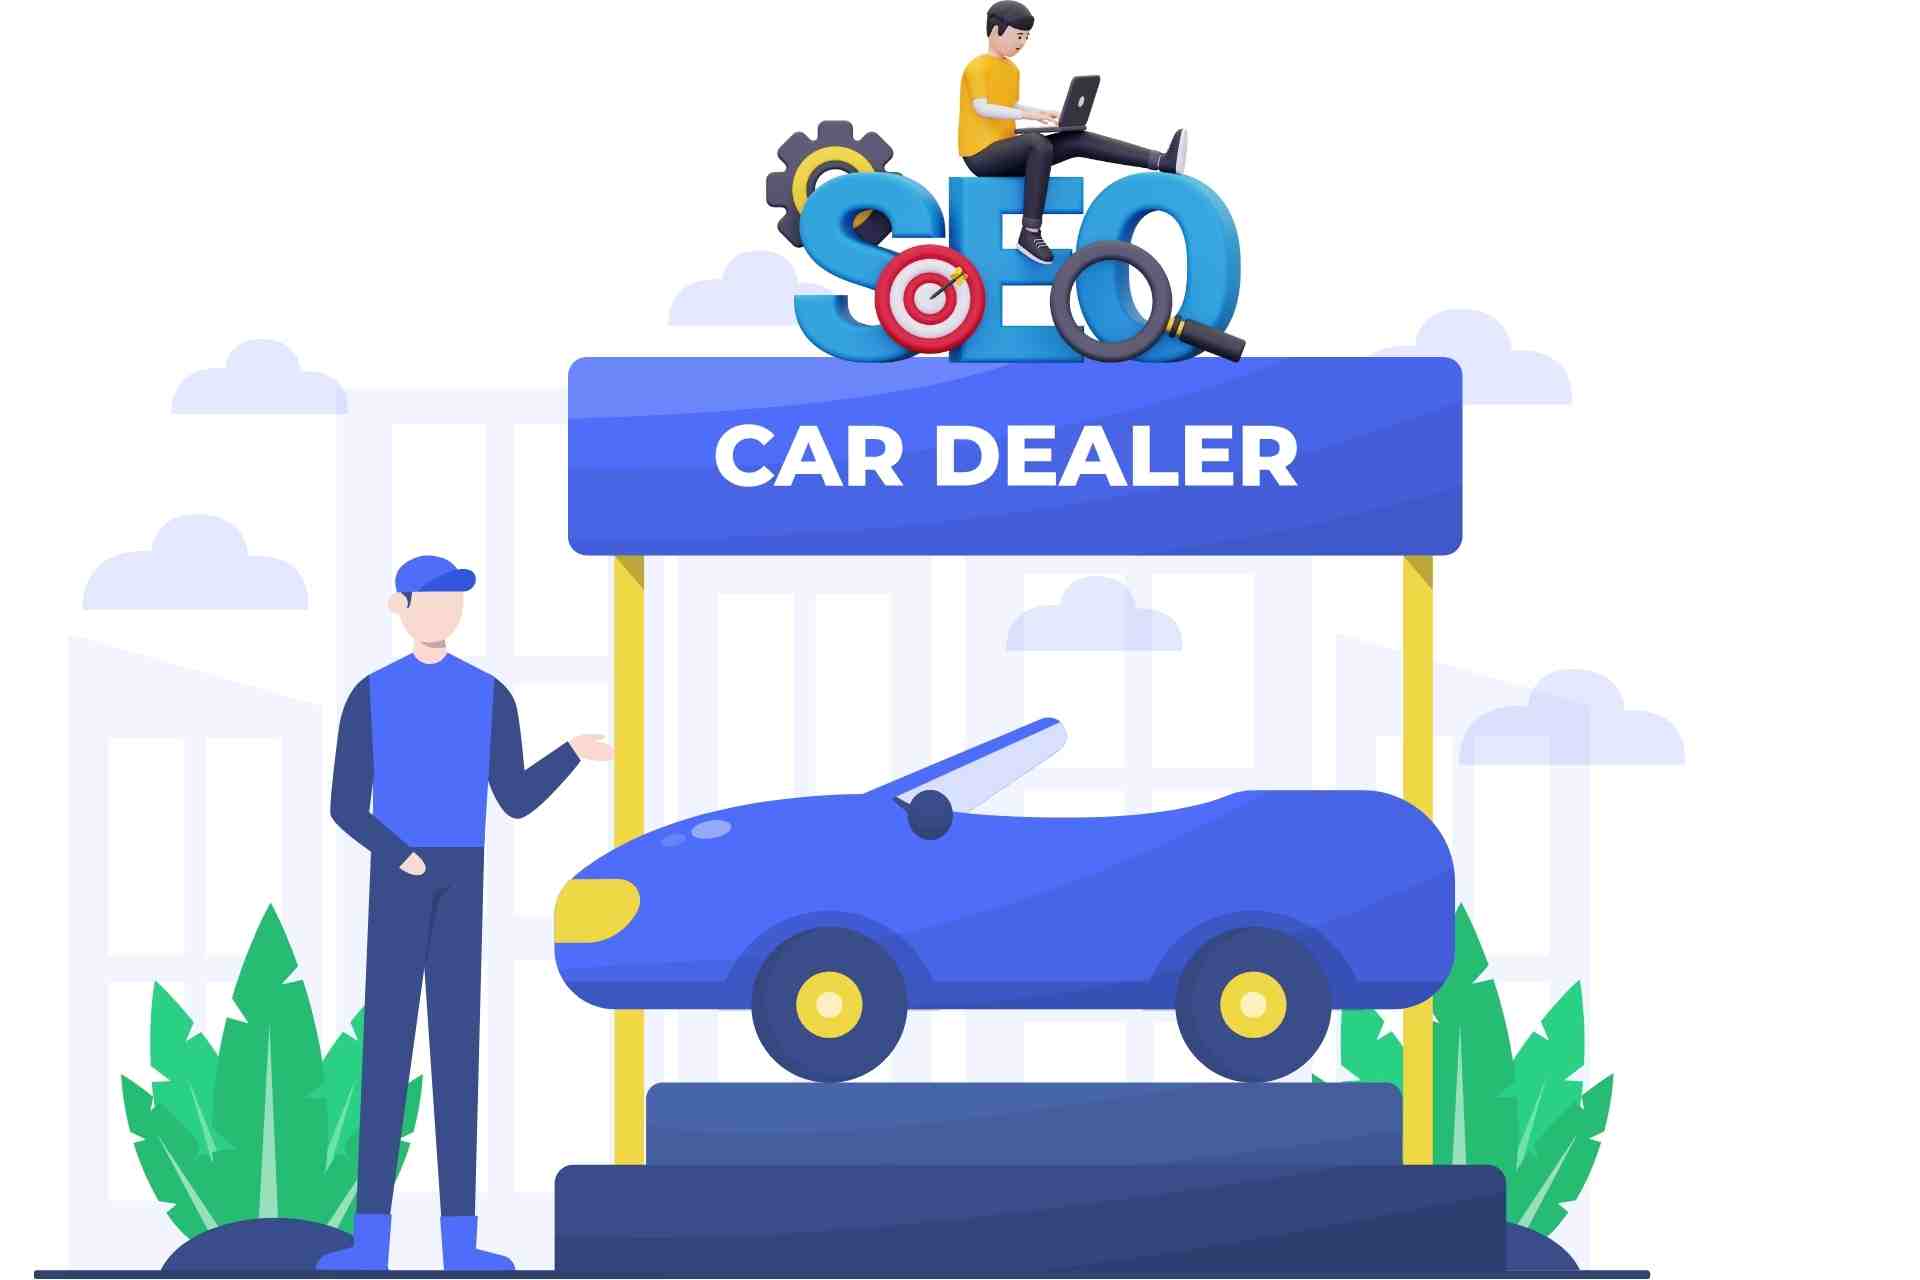 Image-and-Video-SEO-for-Car-Dealership